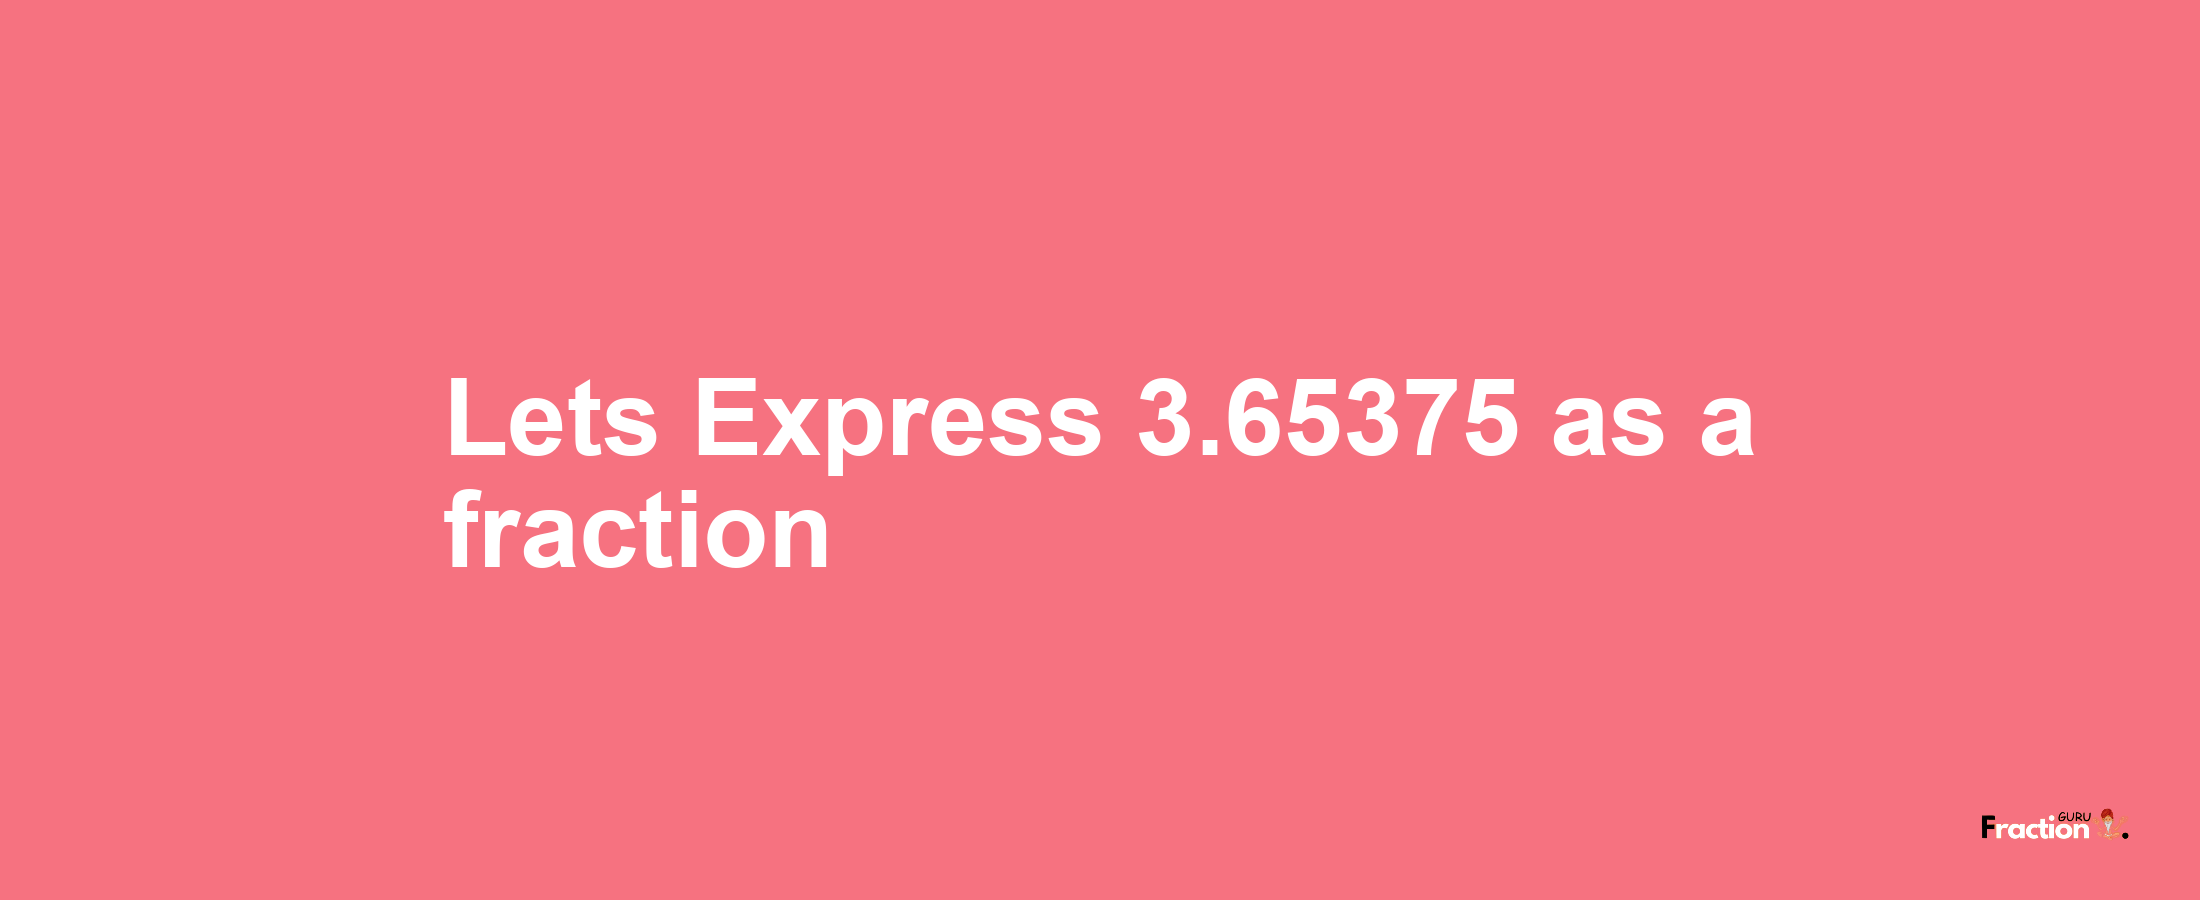 Lets Express 3.65375 as afraction